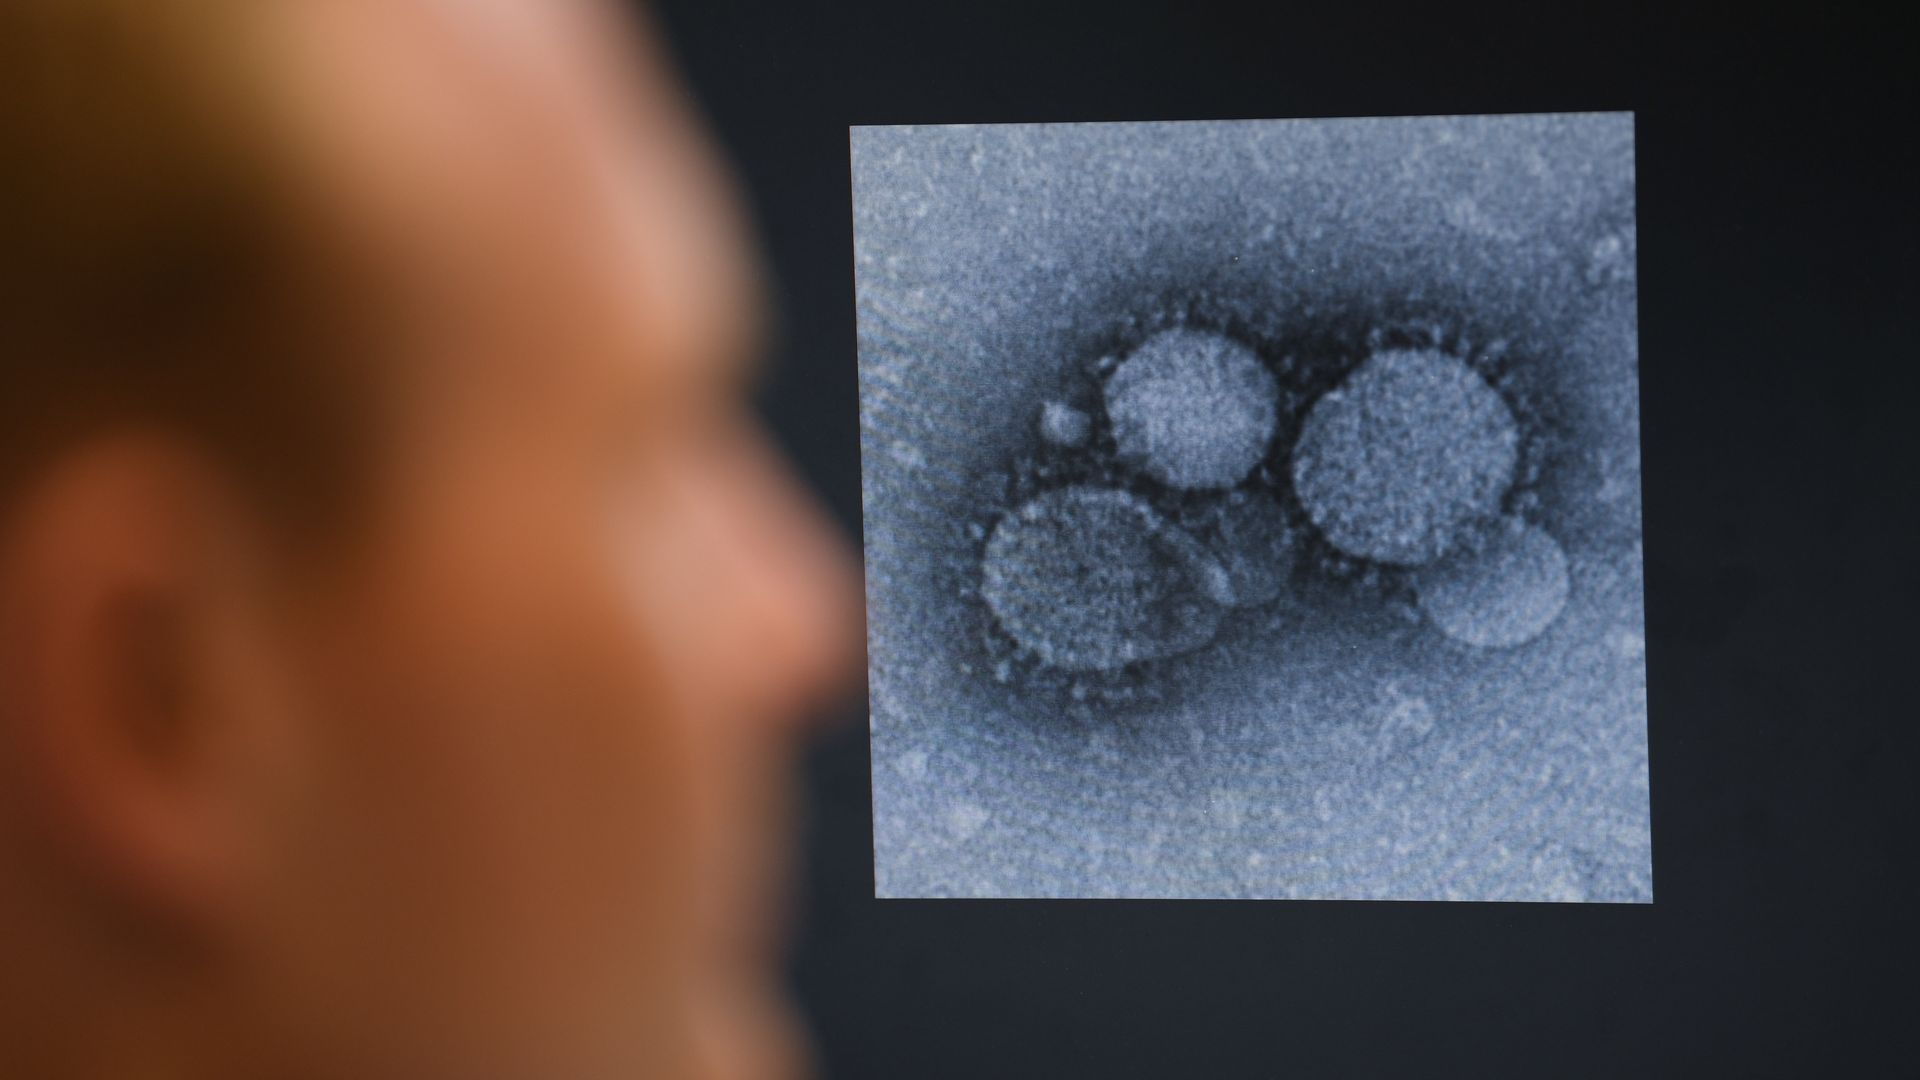 In this image, a close up of the coronavirus is displayed 